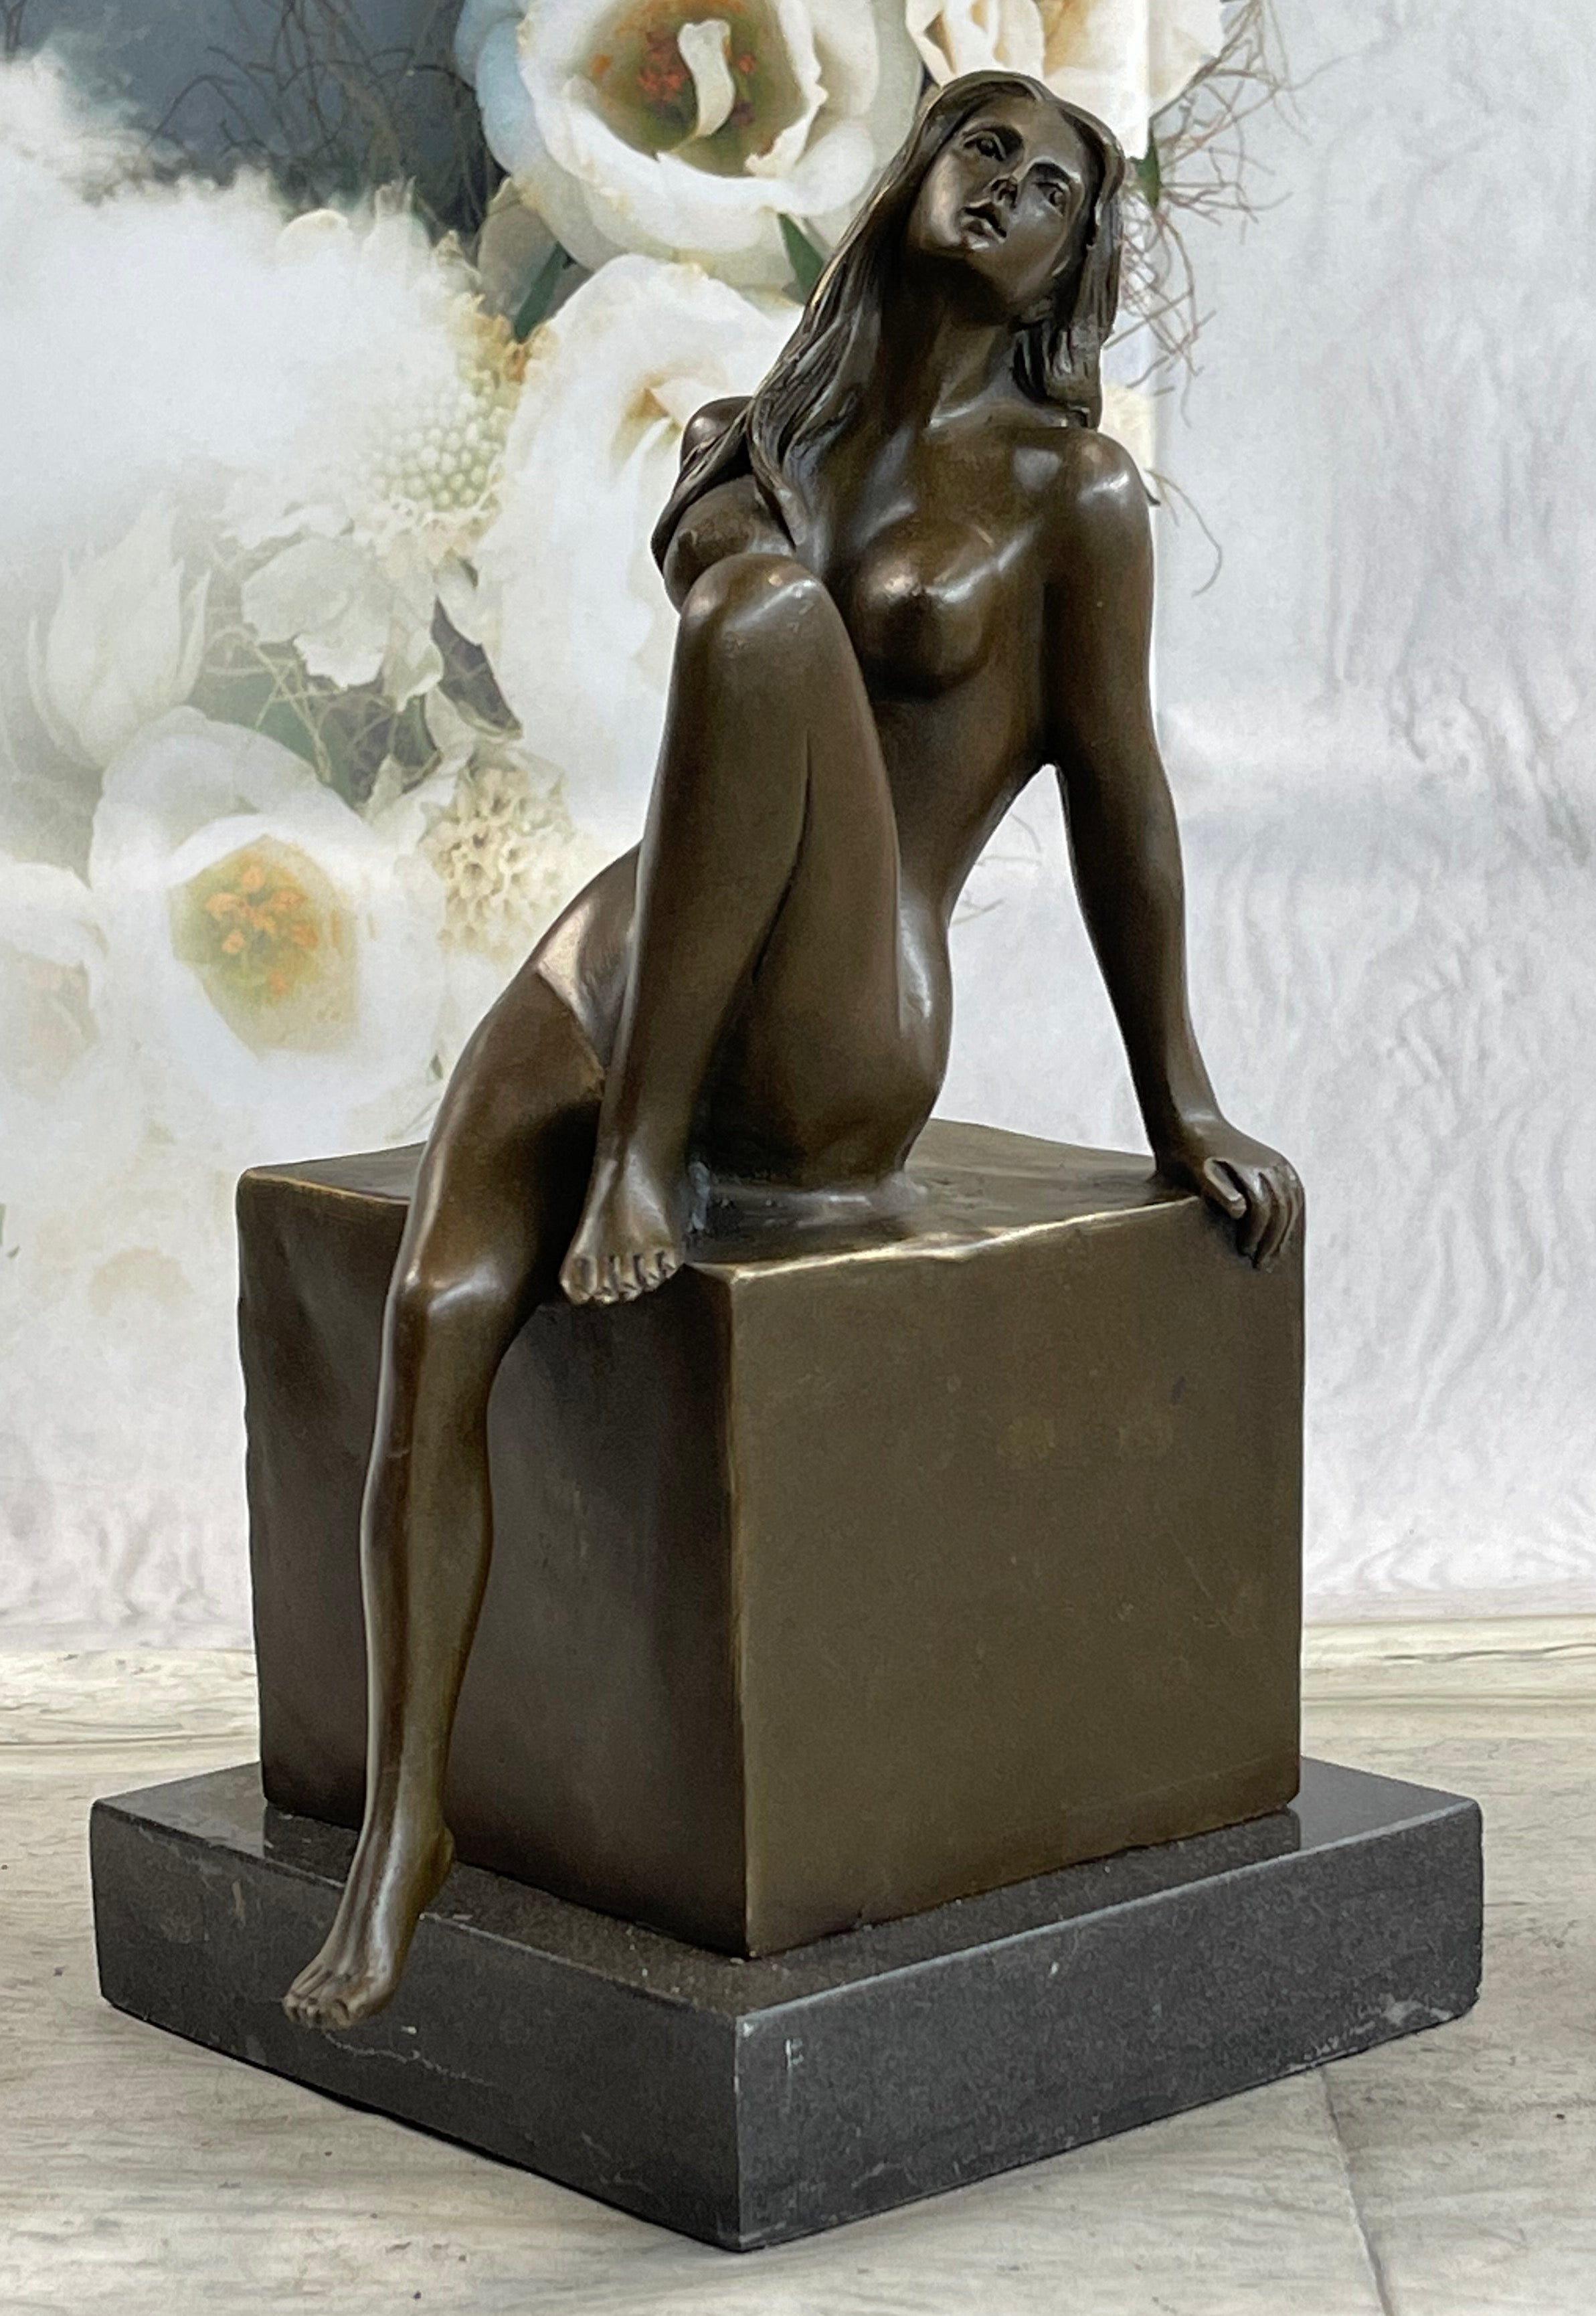 Handcrafted bronze sculpture SALE Decor Home Milo By By Female Exotic Nude